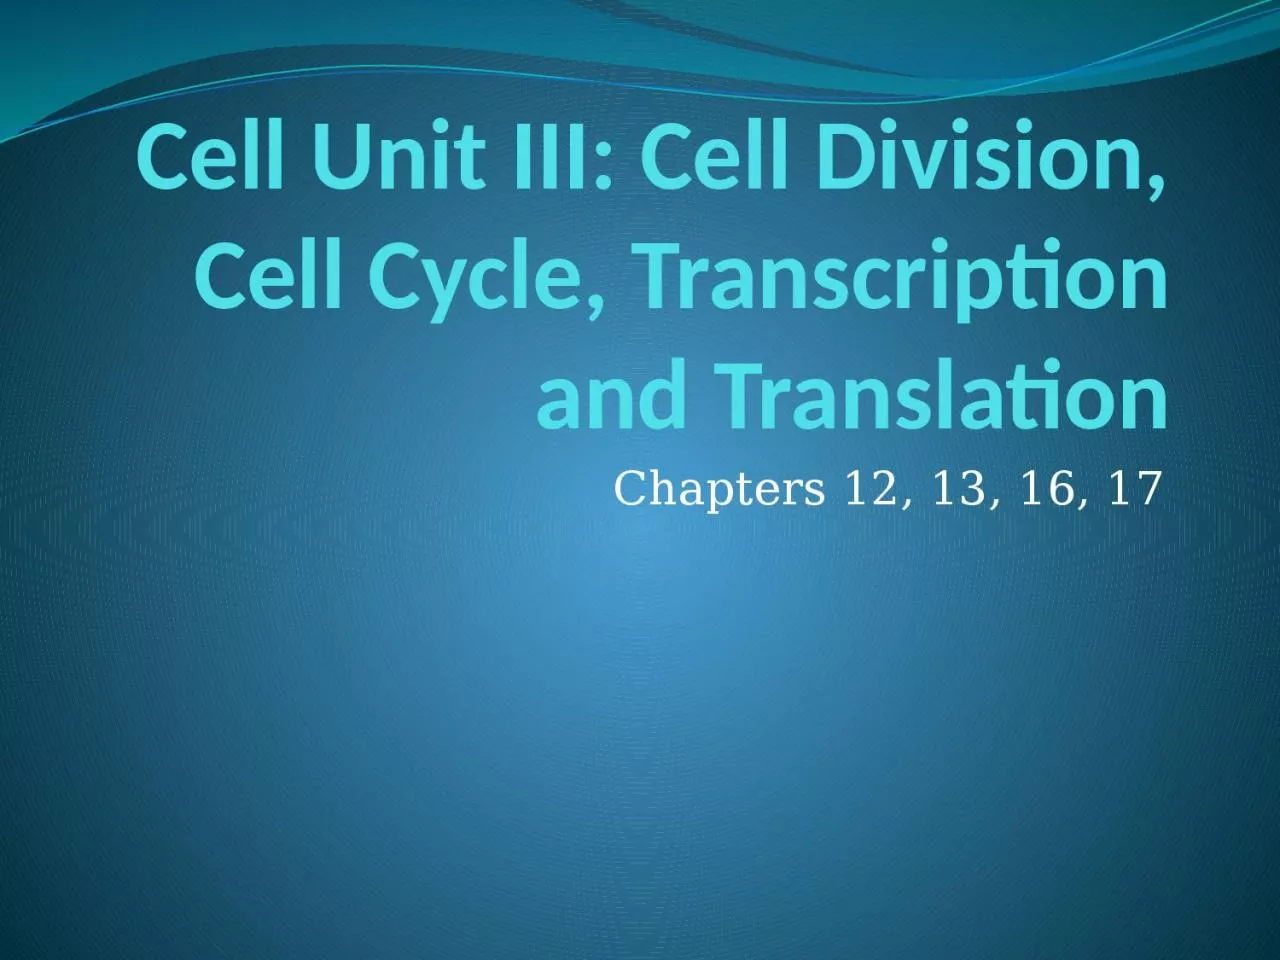 Cell Unit III: Cell Division, Cell Cycle, Transcription and Translation